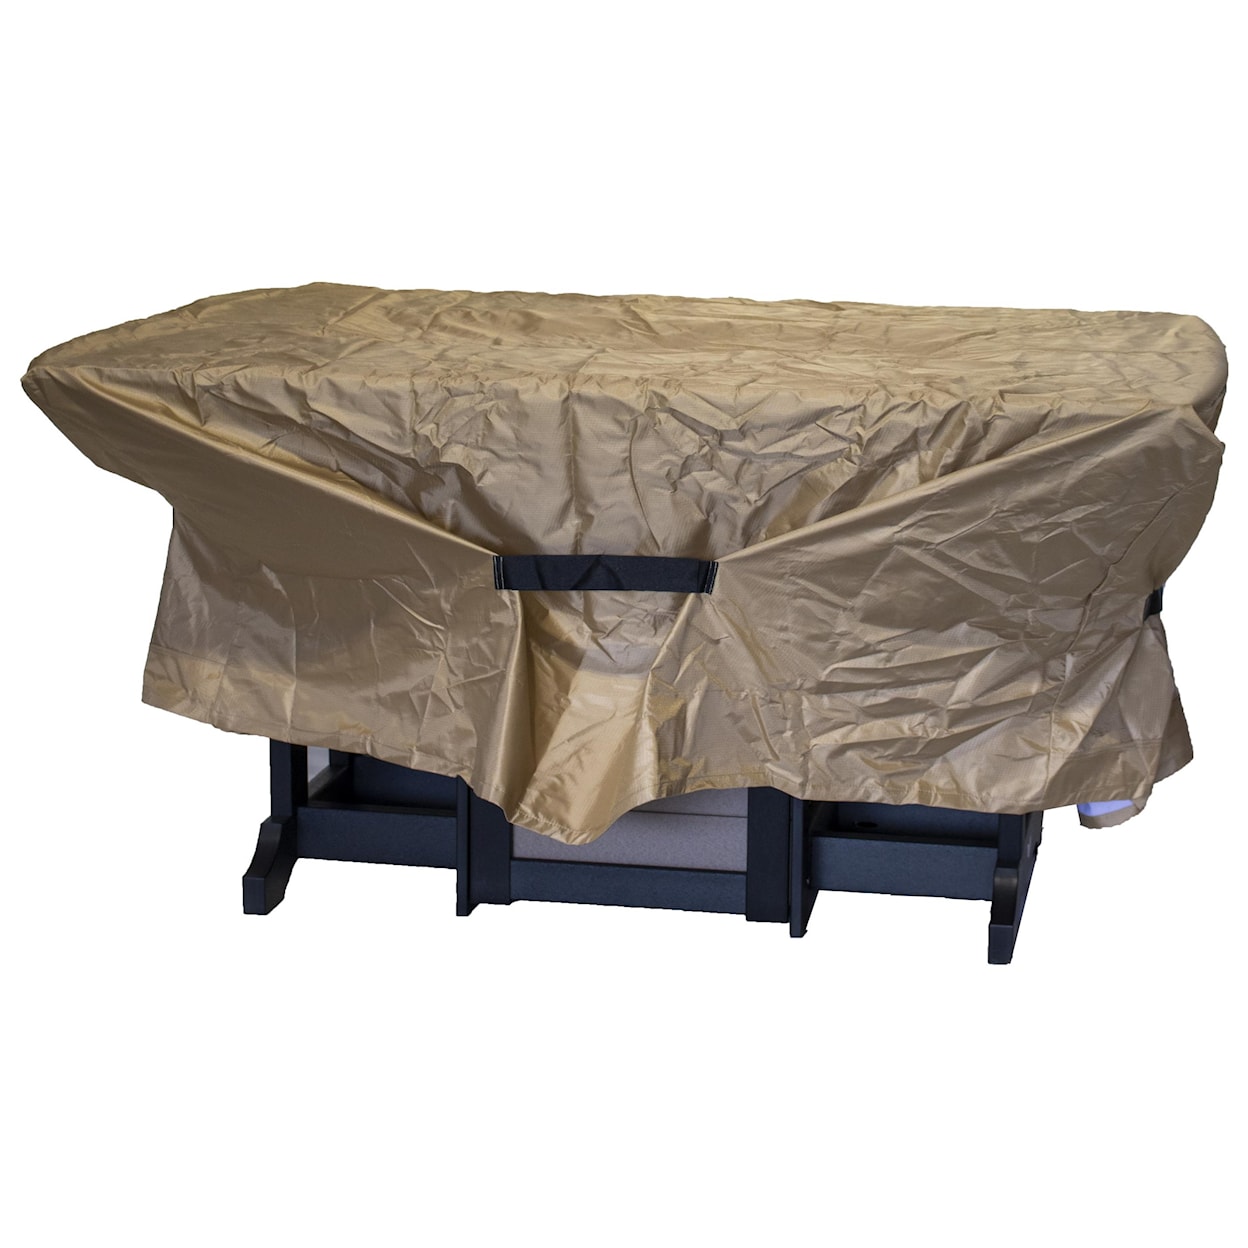 Berlin Gardens Donoma Fire Pit and Accessories 44" x 96" Rectangular Fire Table Cover